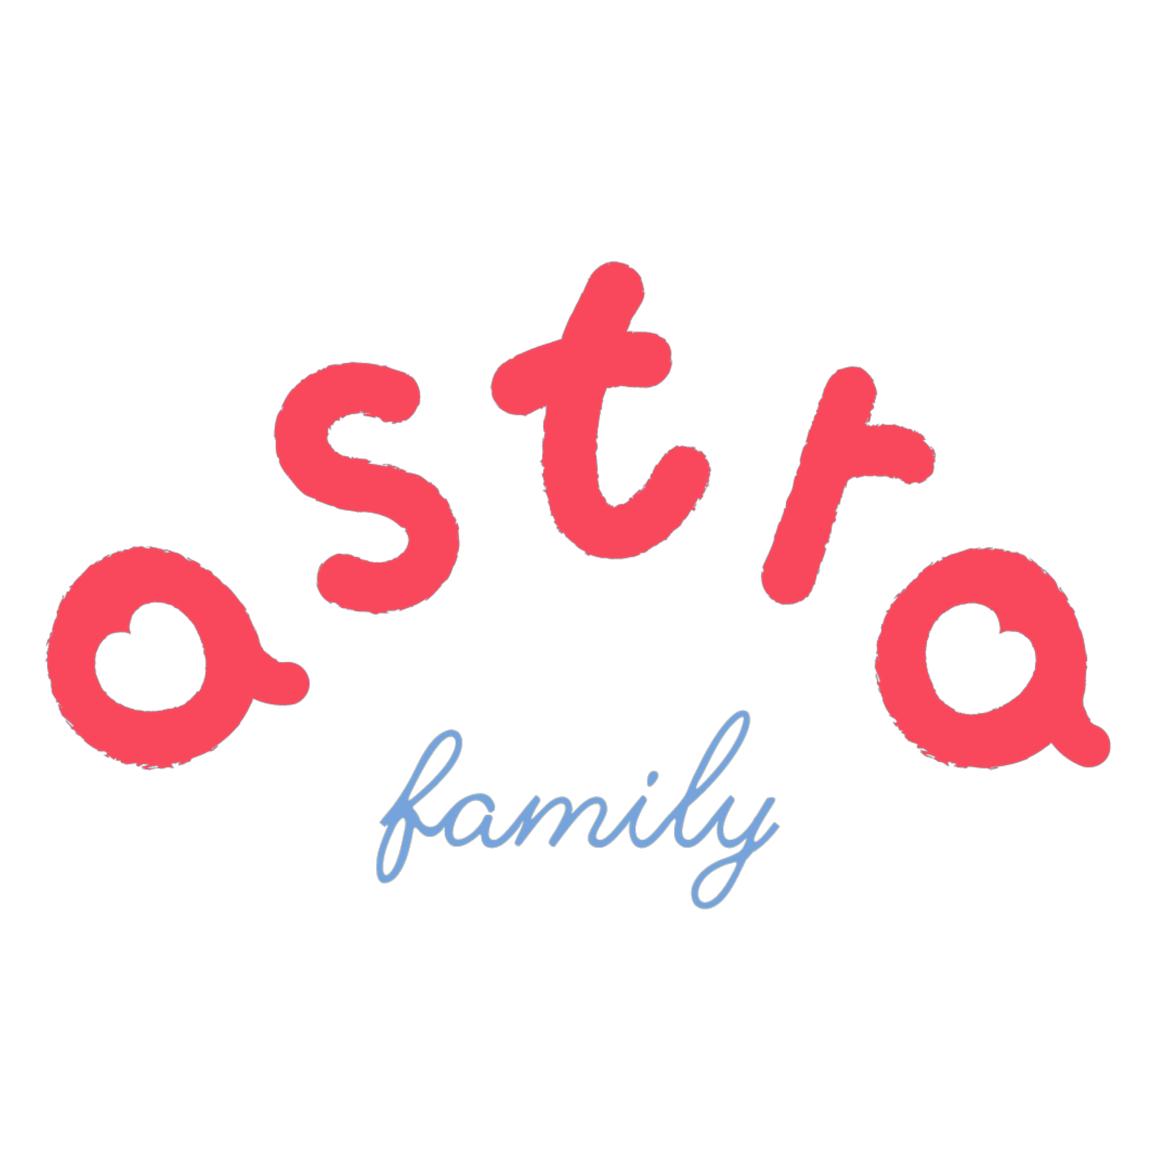 Astra Family's images